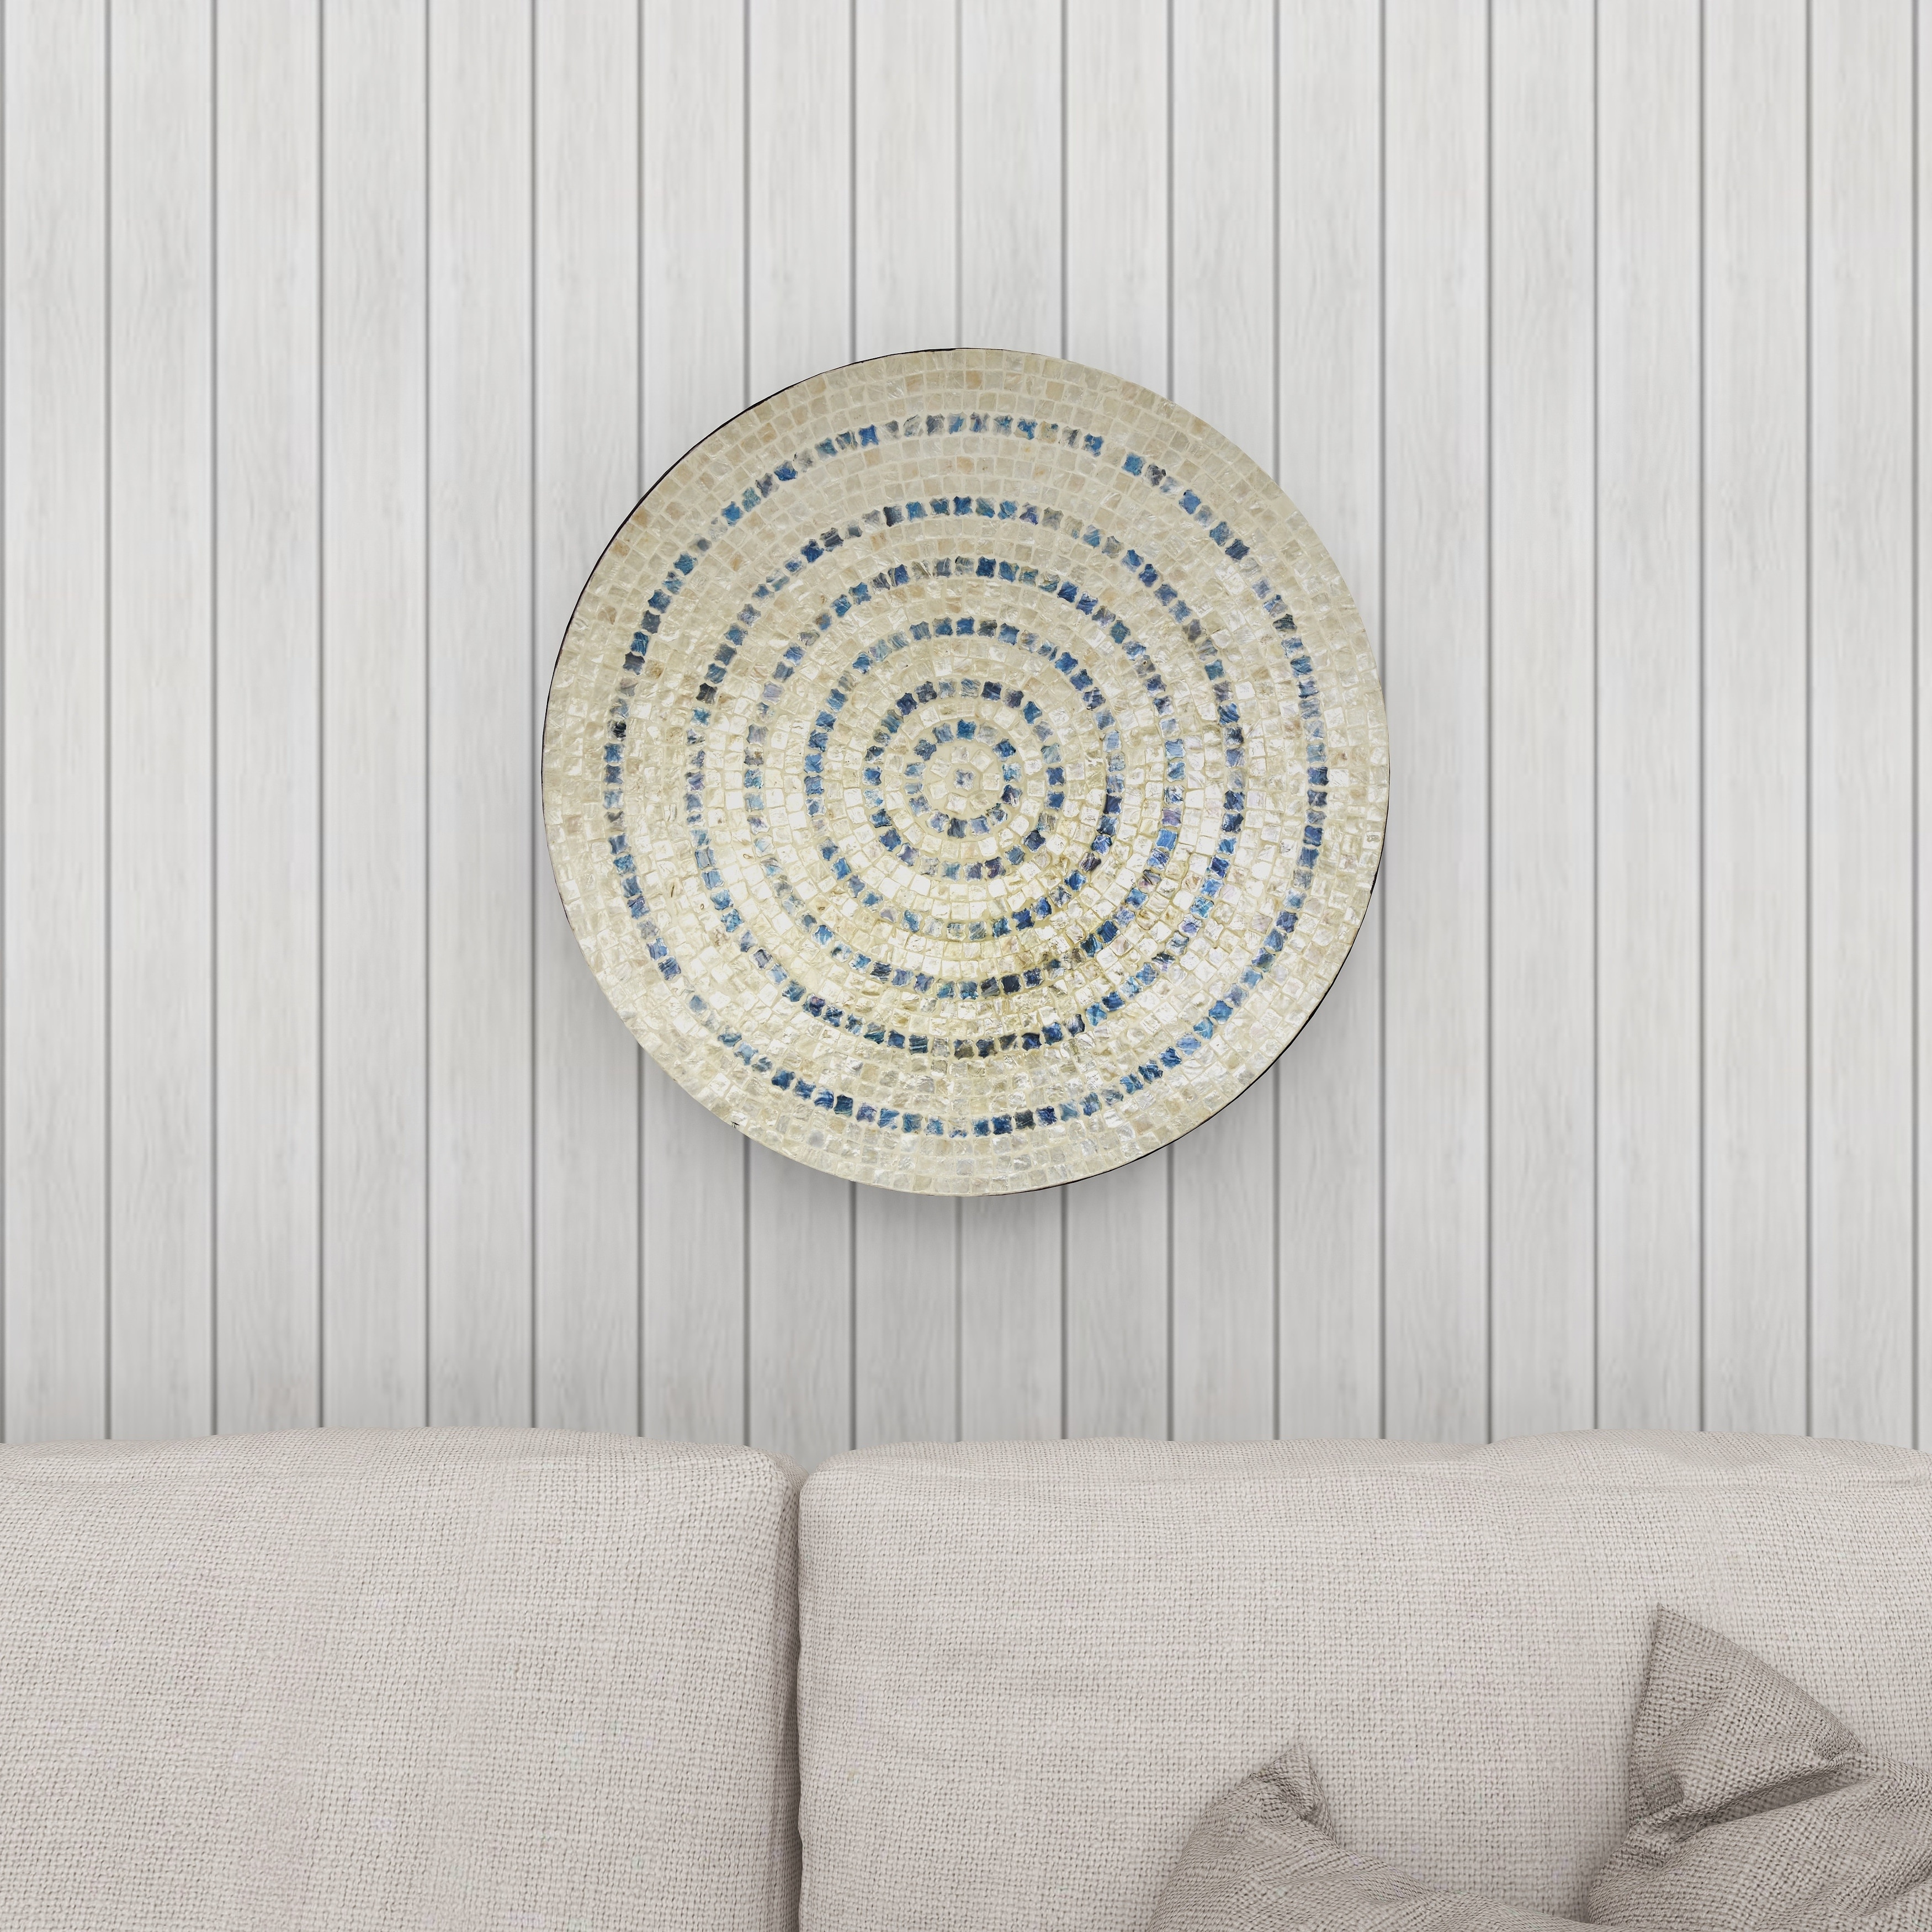 Beige Mother of Pearl Handmade Mosaic Plate Wall Decor with Blue Accents  Bed Bath  Beyond 19563453